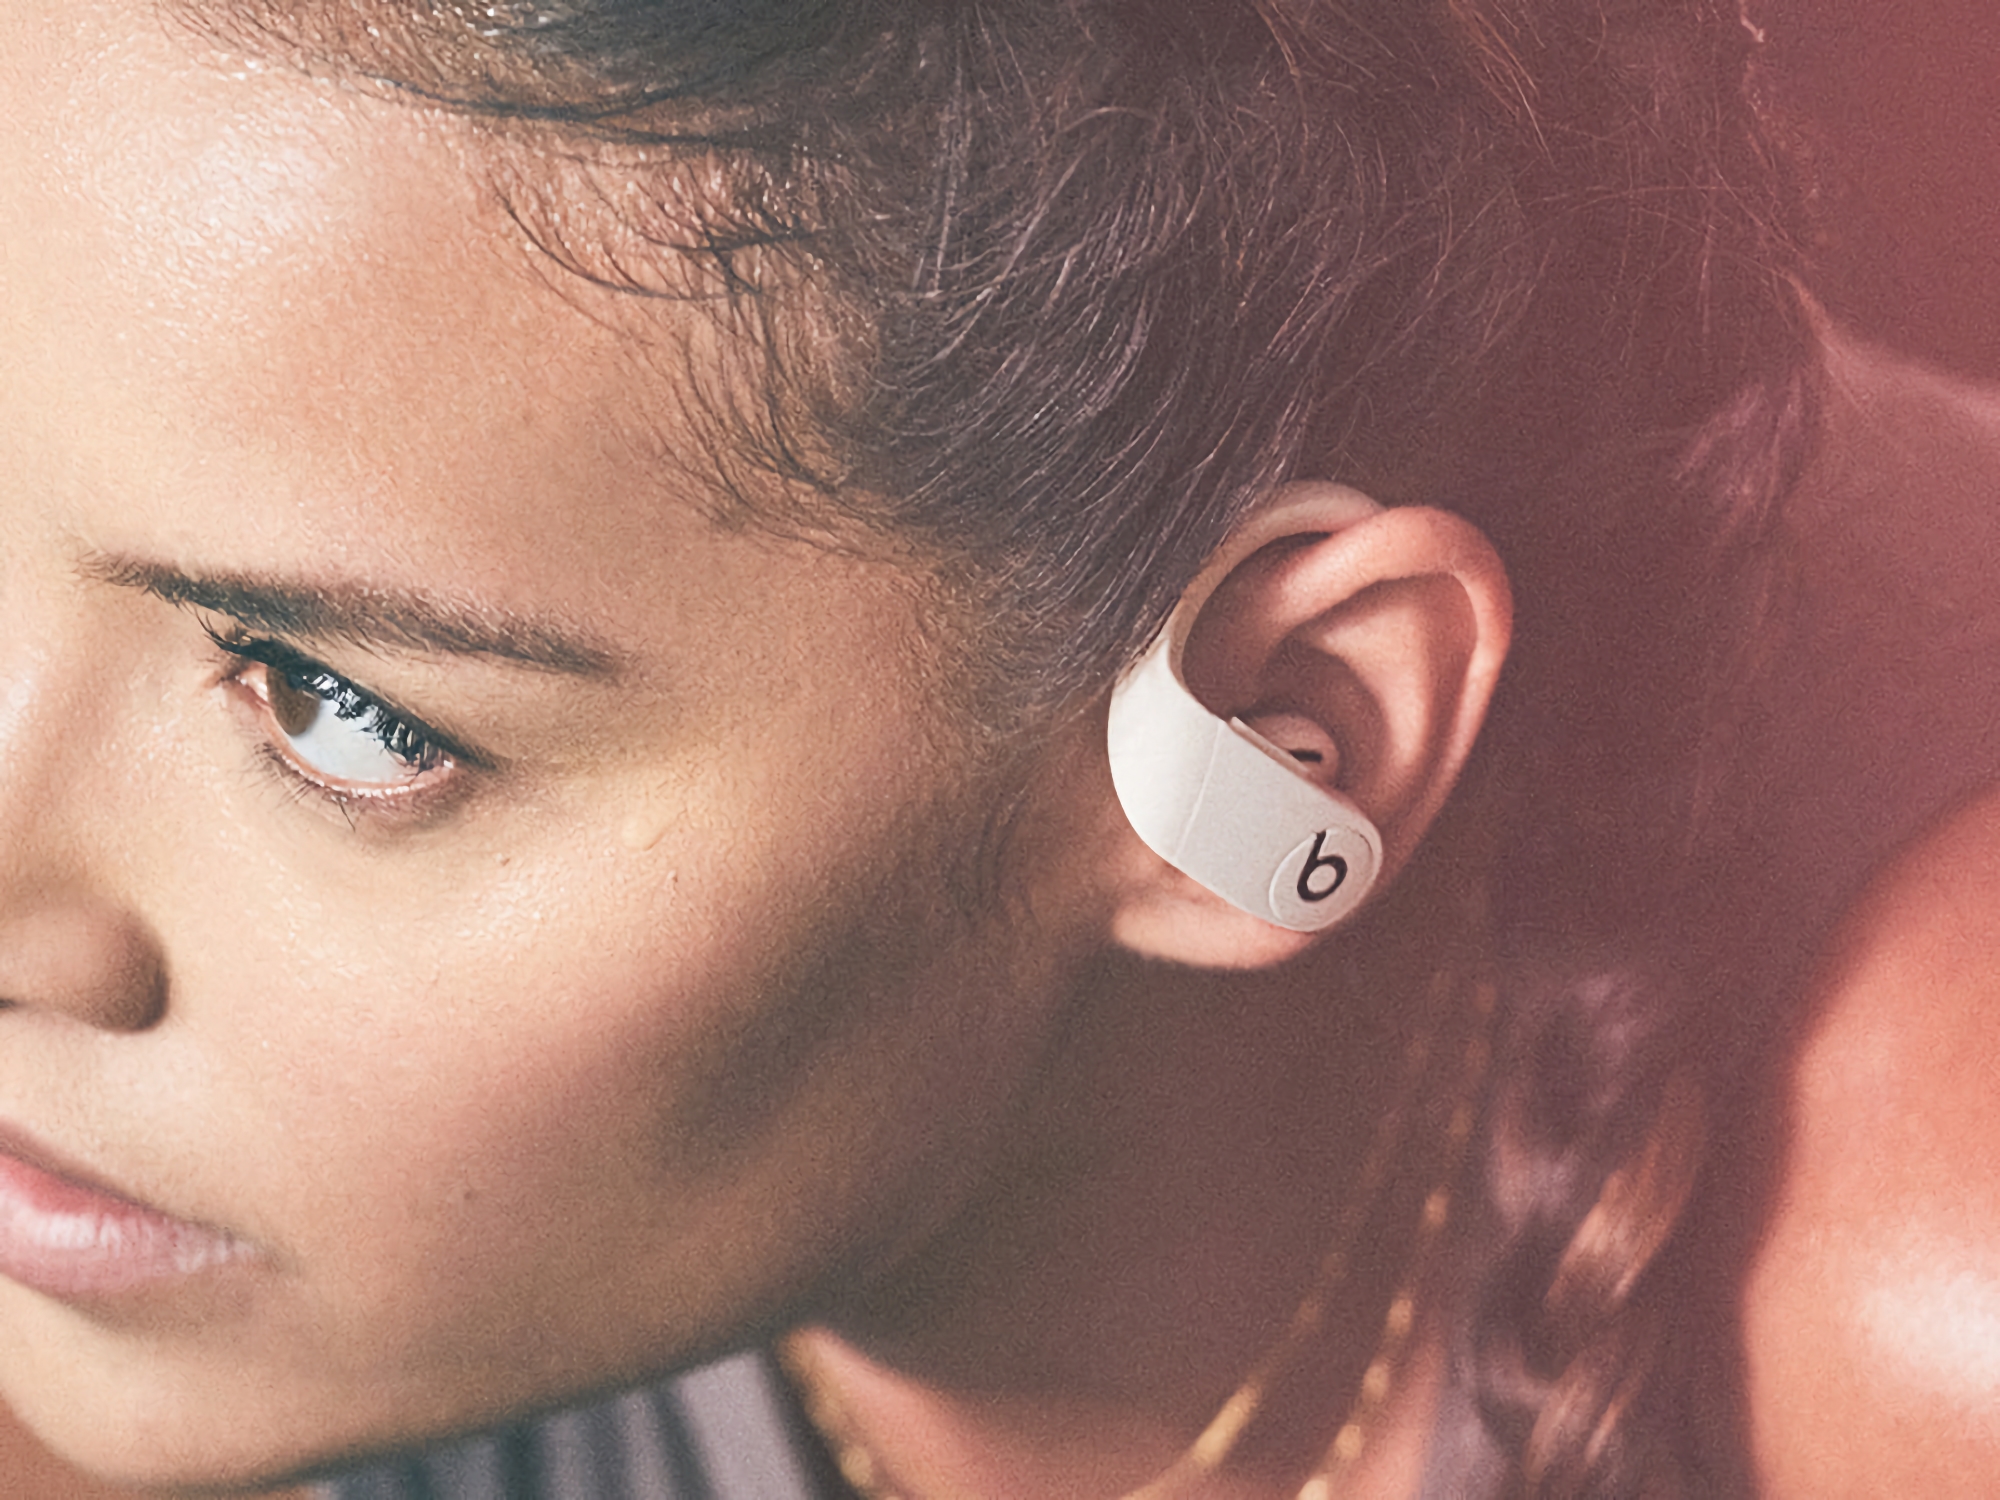 Apple fixes Bluetooth security issue in TWS earphones Beats Fit Pro and Powerbeats Pro